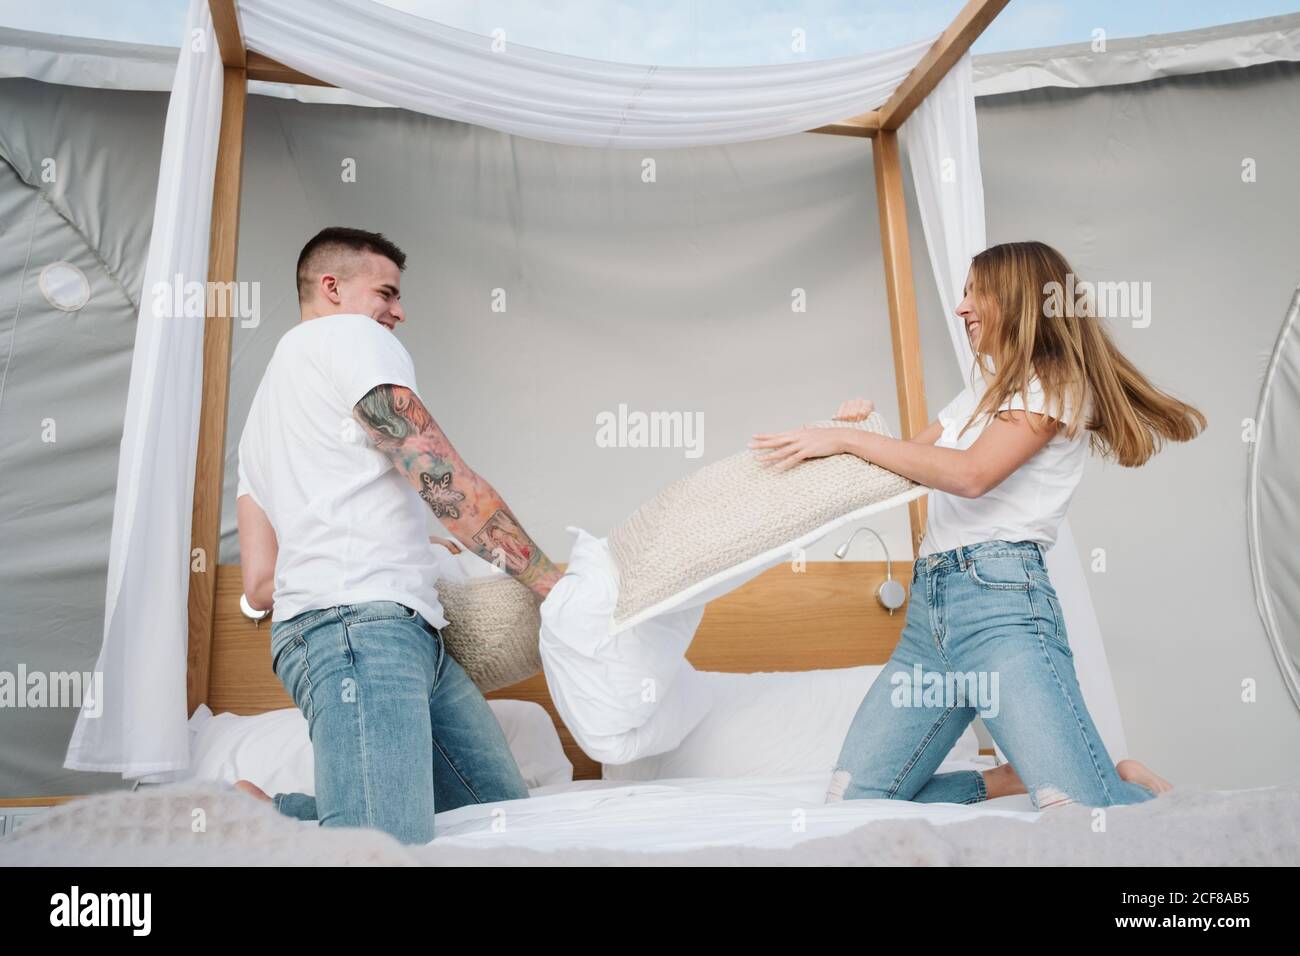 Cheerful young couple having fun during pillow fight on bed in big tent with transparent roof Stock Photo